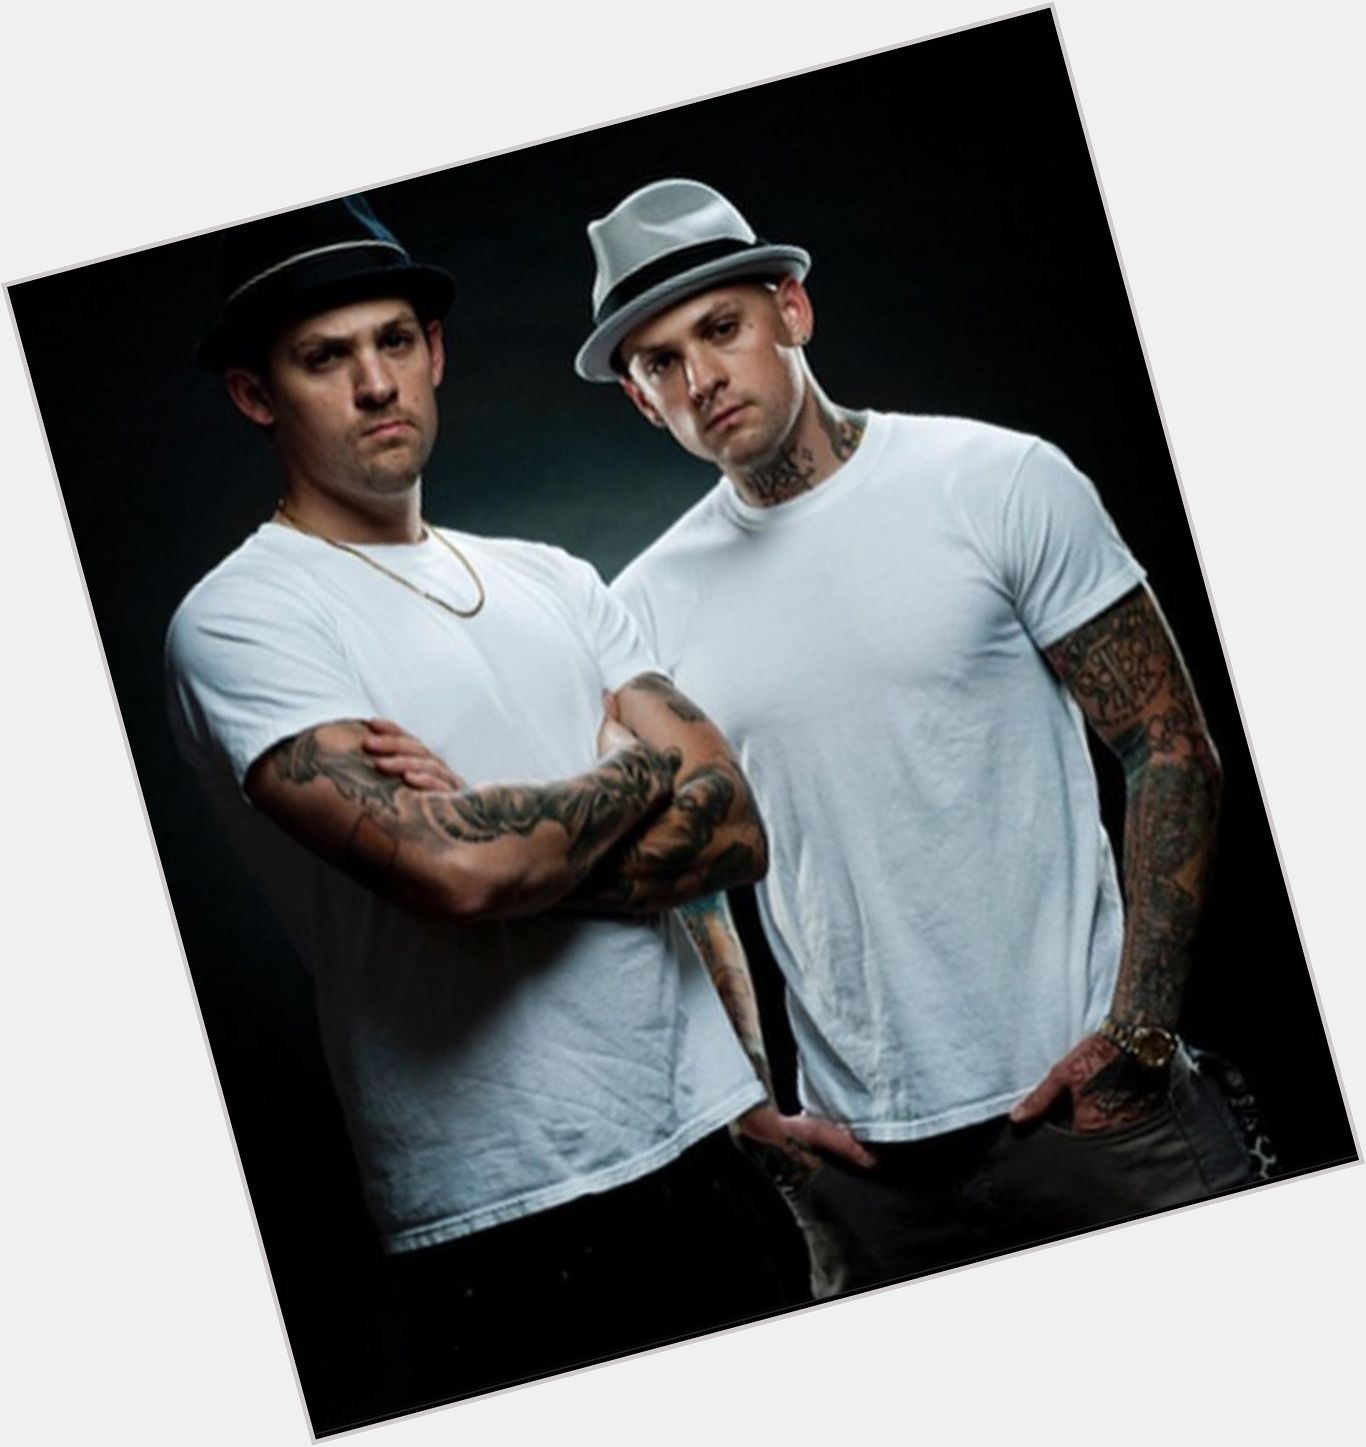 Happy Birthday to Twins Joel Madden and Benji Madden from rock band Good Charlotte,
(March 11, 1979) 